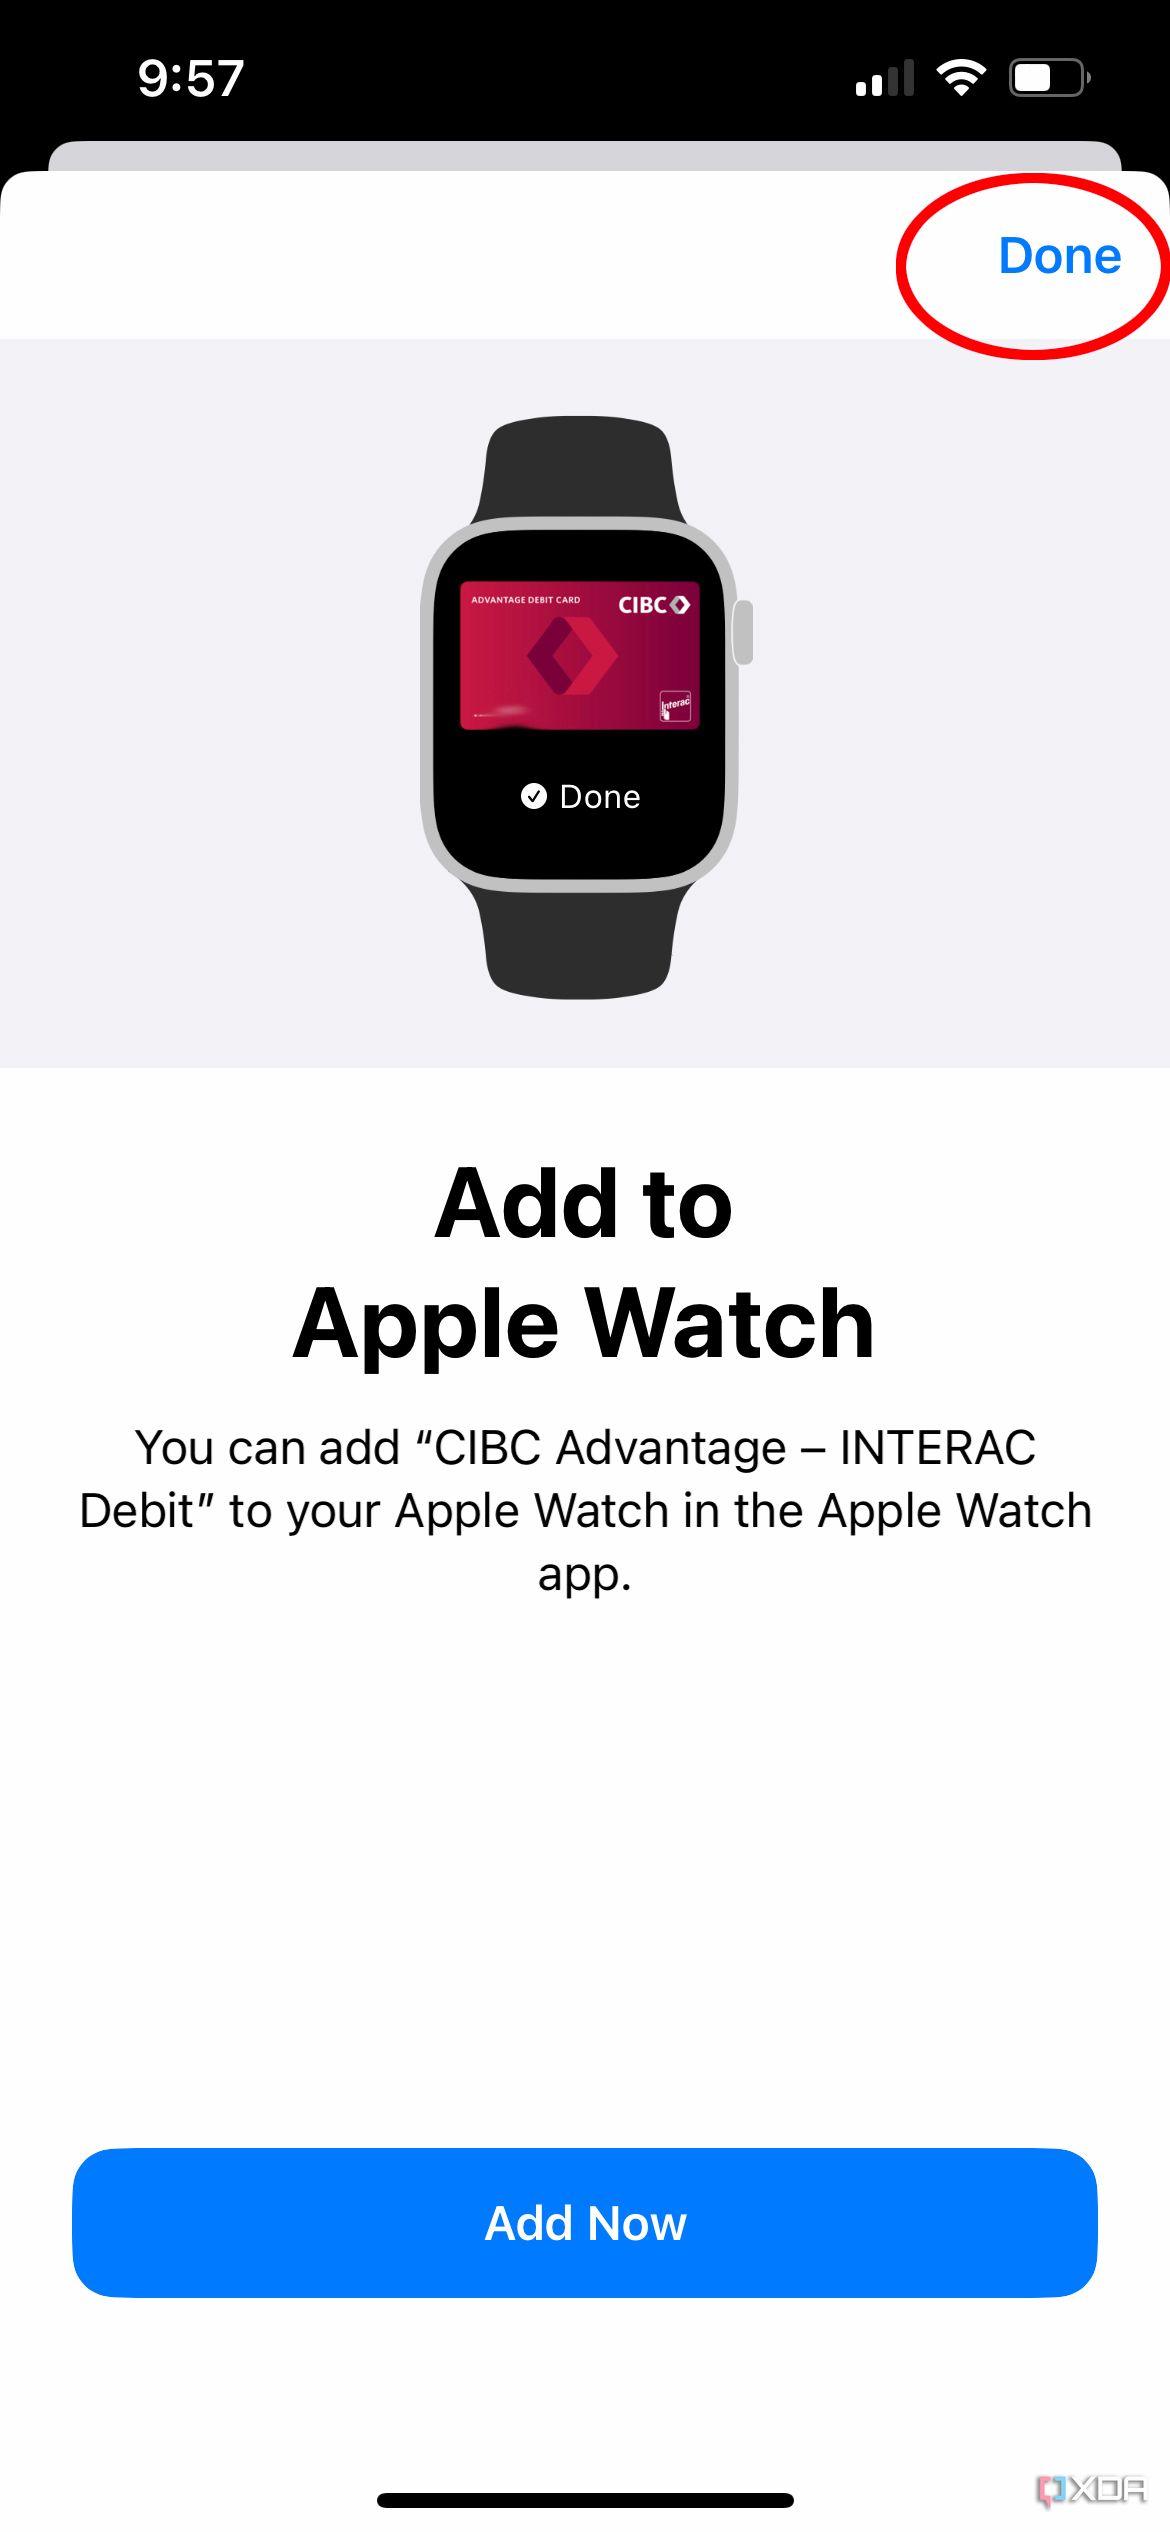 The Add to Apple Watch page in Apple Wallet.